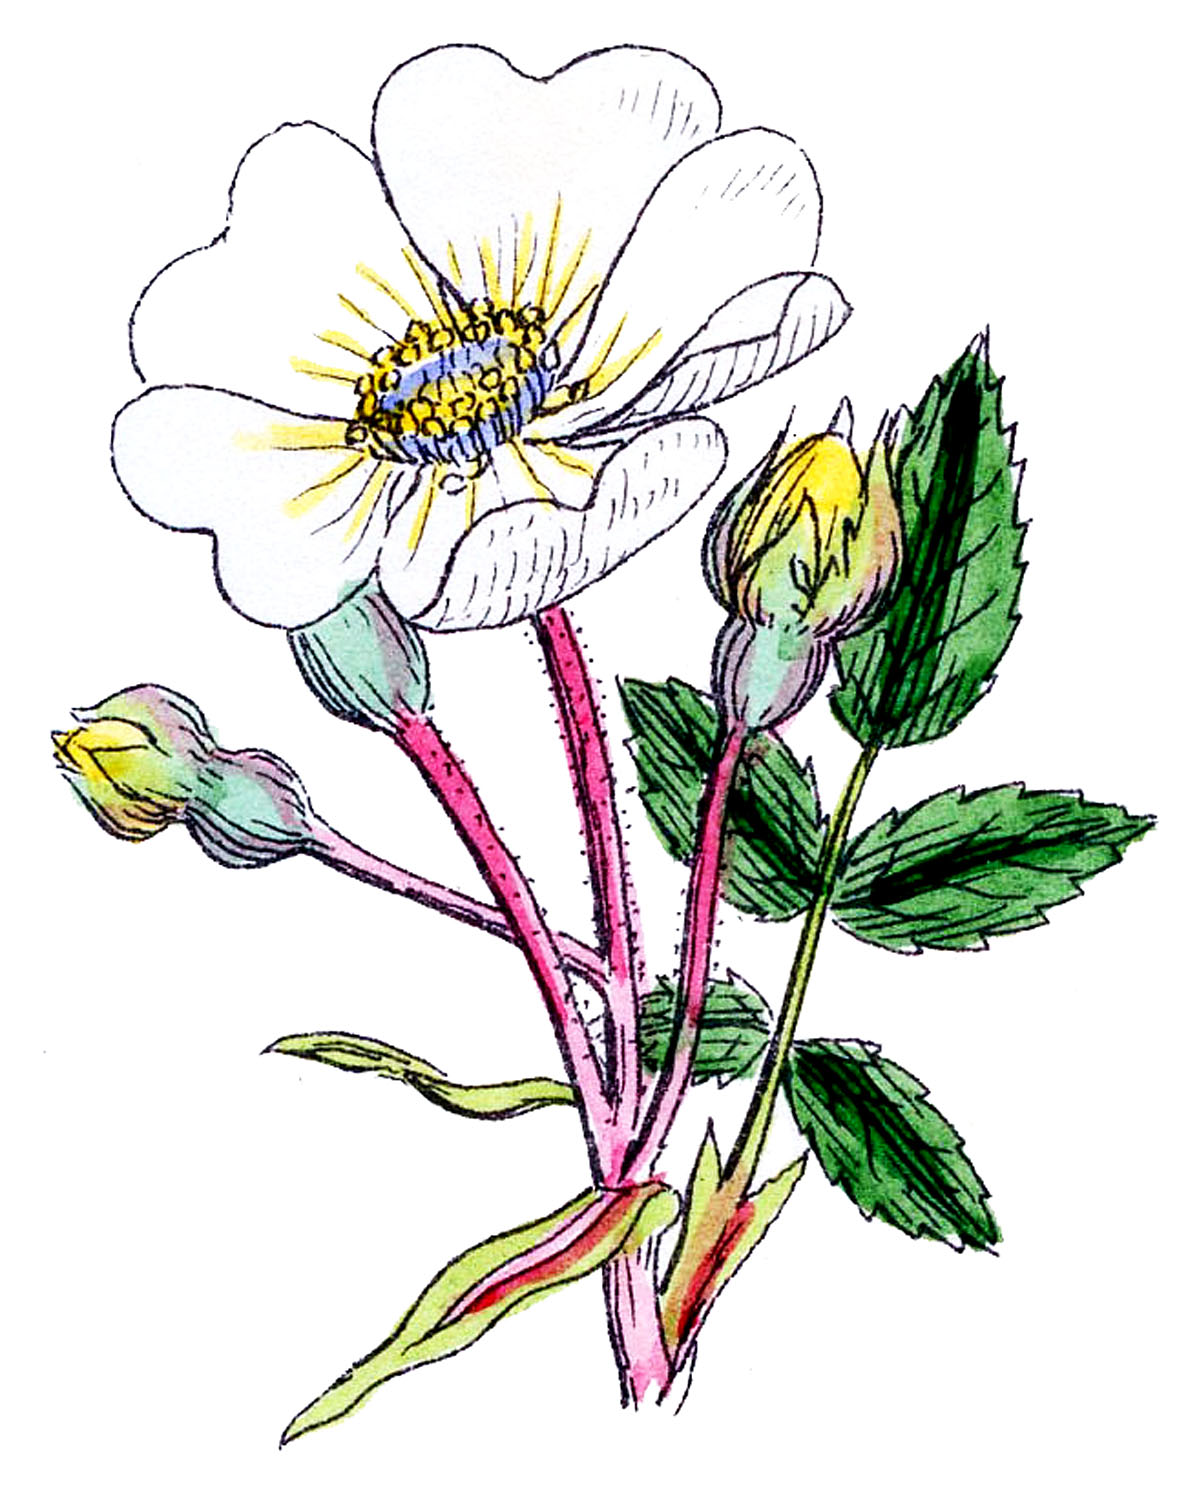 Vintage Botanical Graphics - Wild Roses - The Graphics Fairy